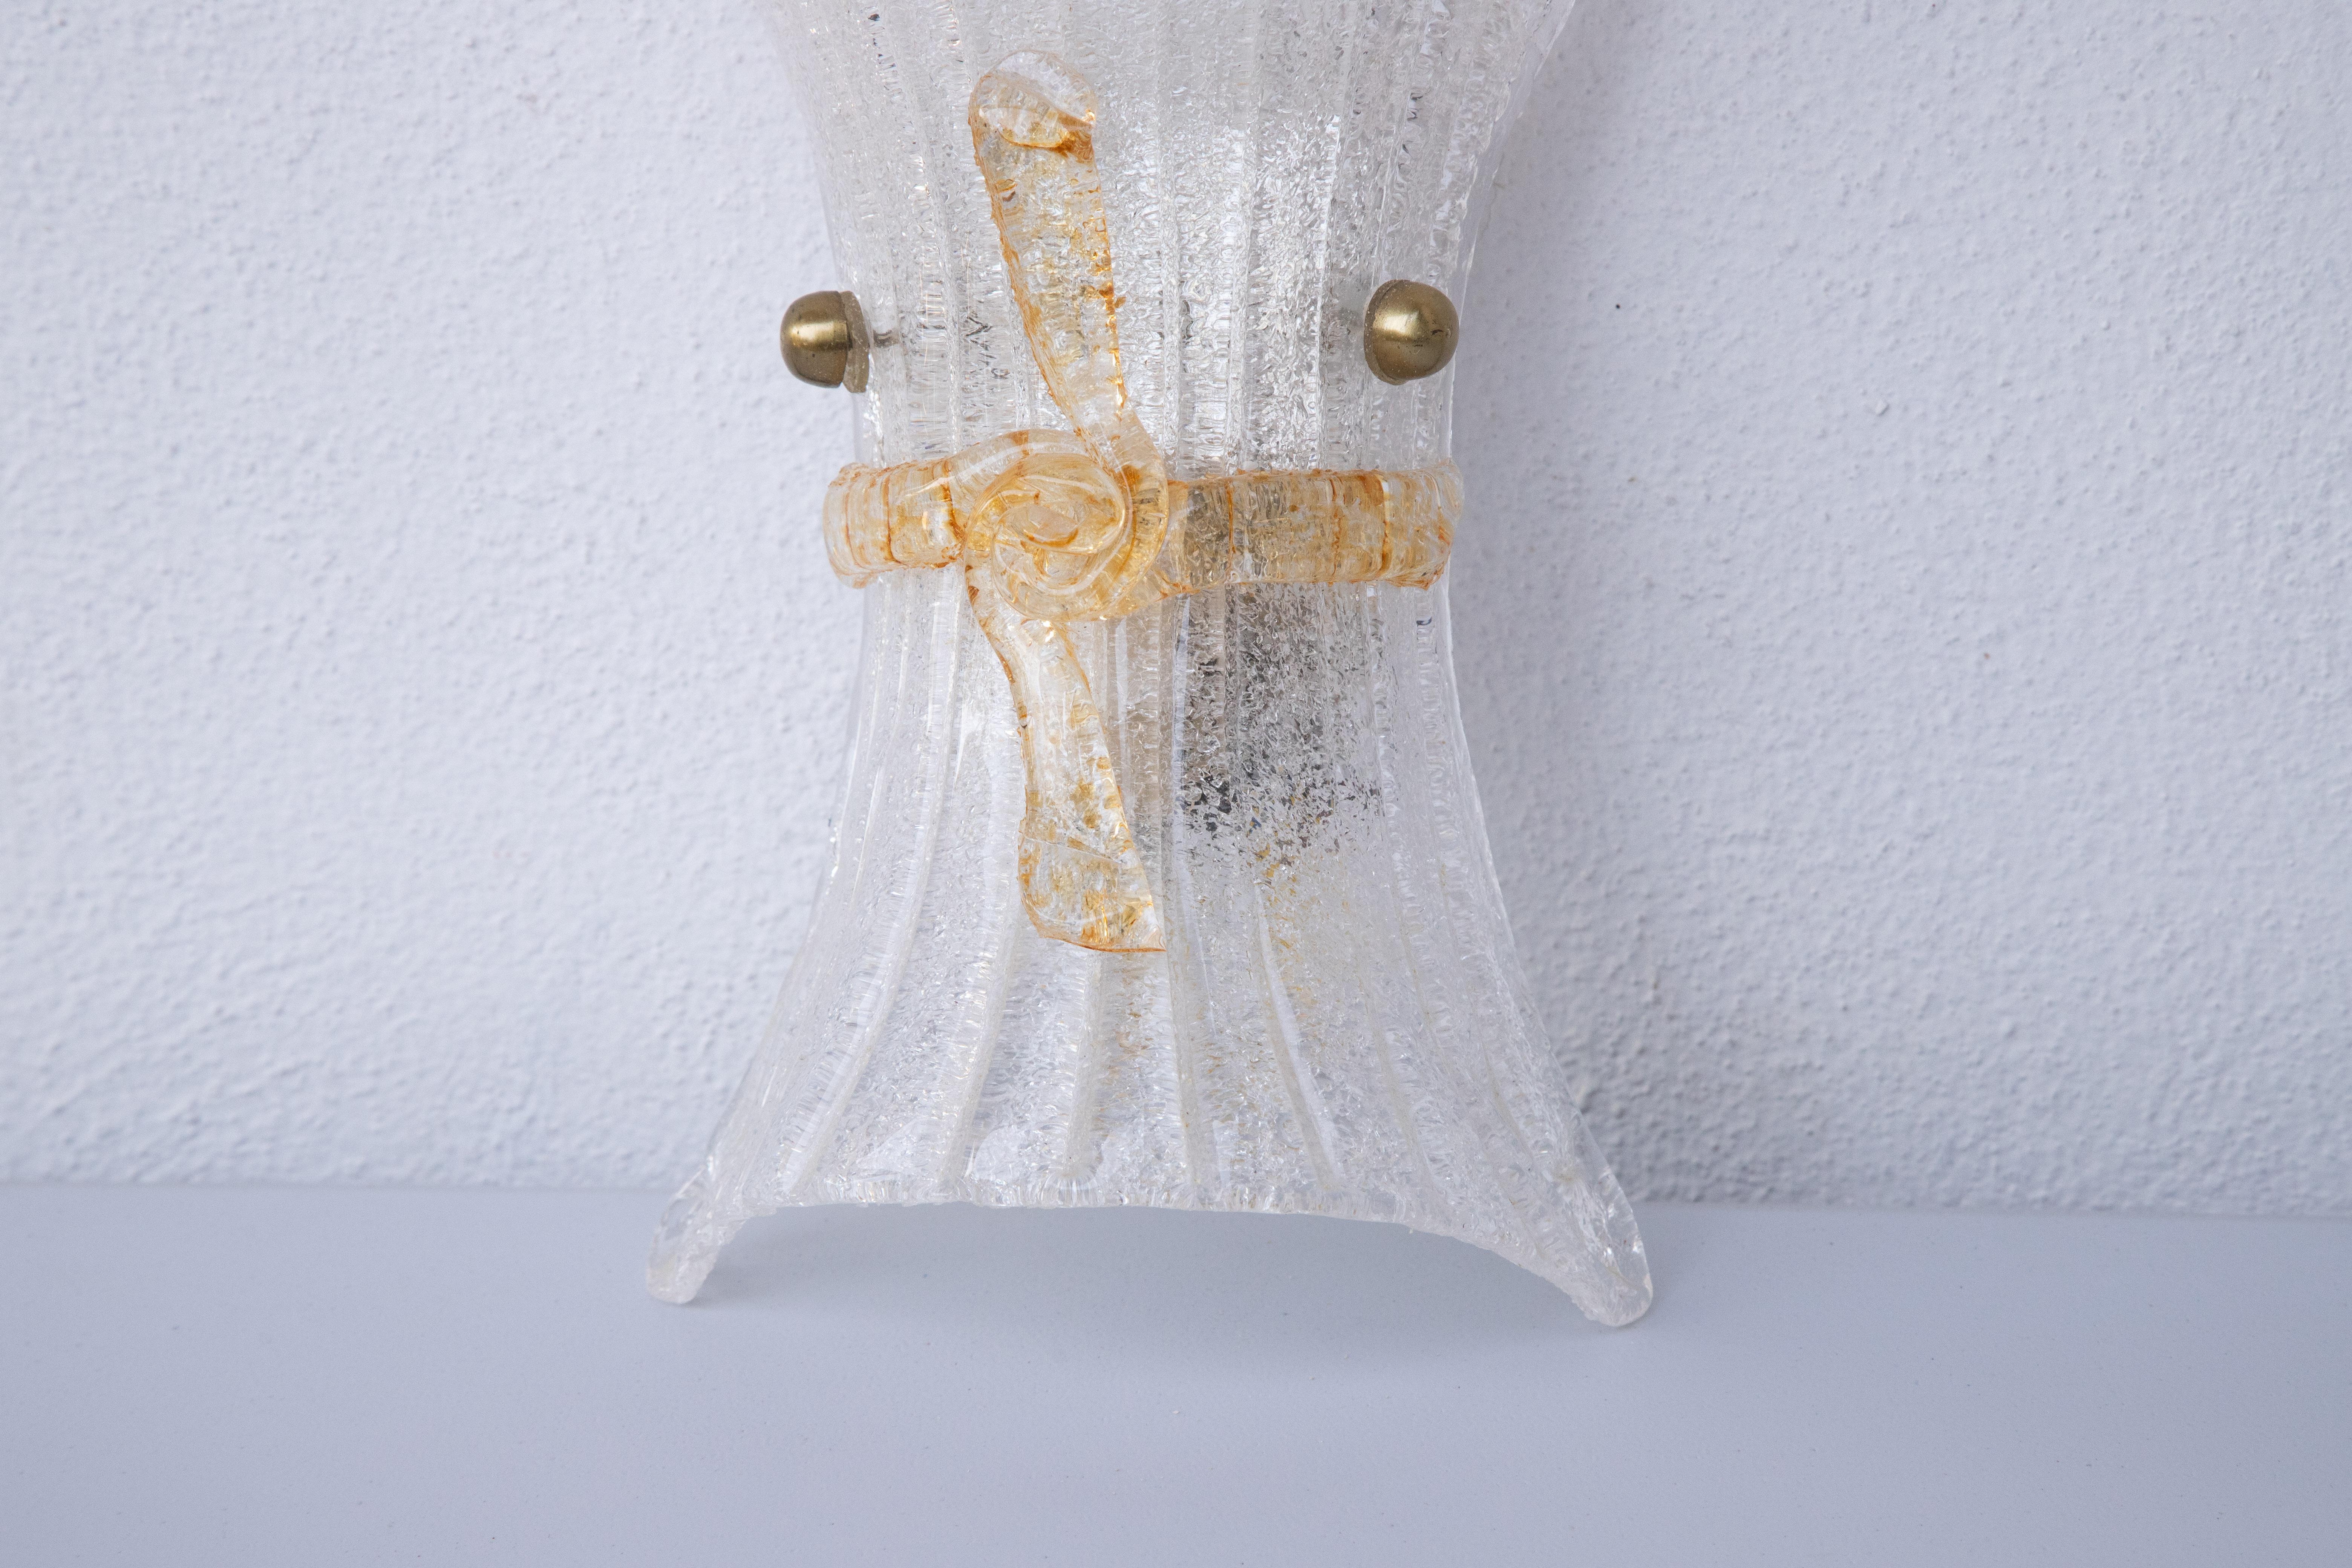 Wonderful Murano wall sconce.
Excellent vintage condition.

The light mounts one e14 lights, European standard.

Measurements: Height 28 centimeters, width 22 centimeters, depth 8 centimeters.